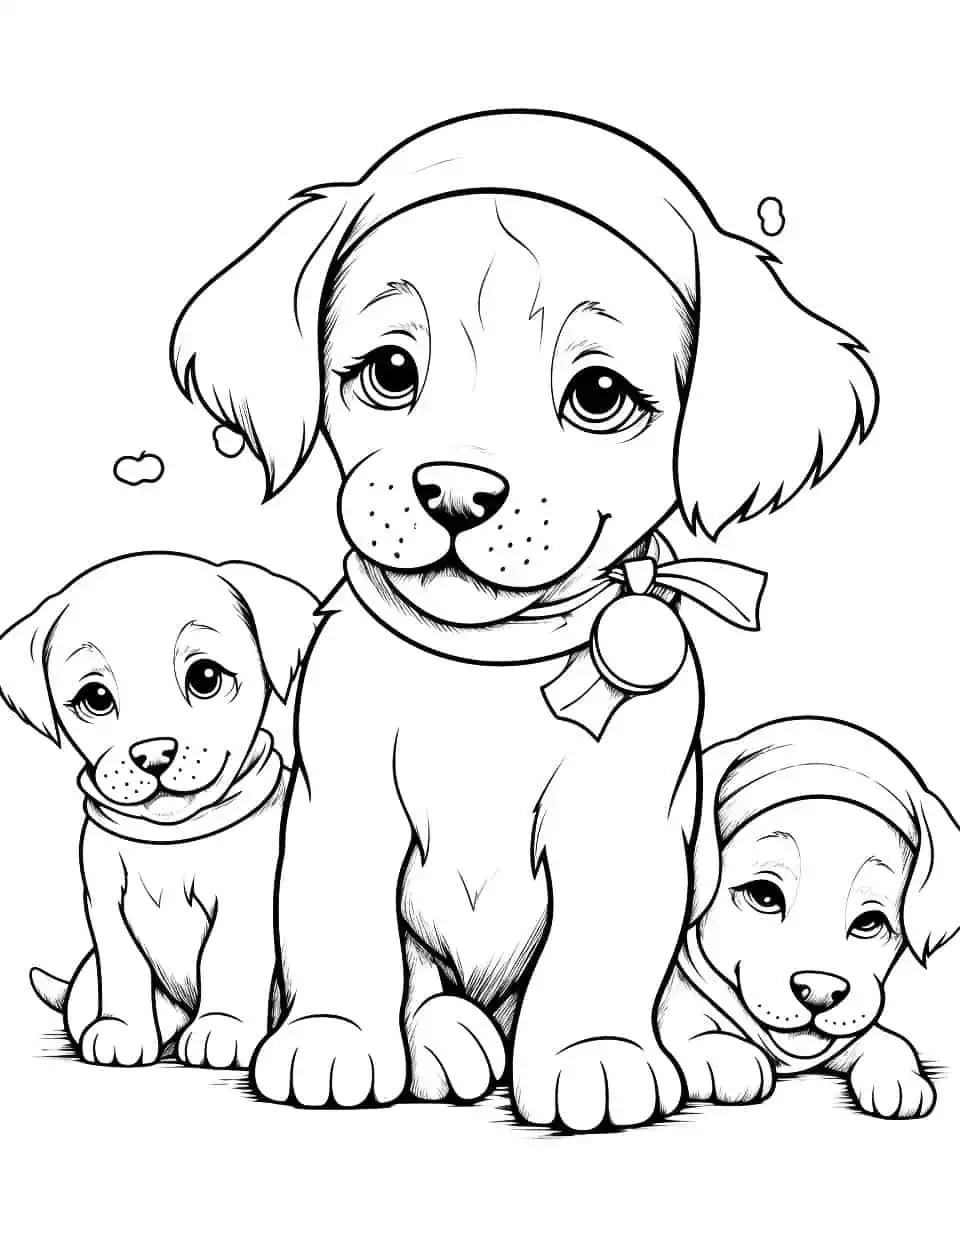 Cute Christmas Puppies Coloring Page - Several puppies wearing Christmas costumes and playing with Christmas decorations.